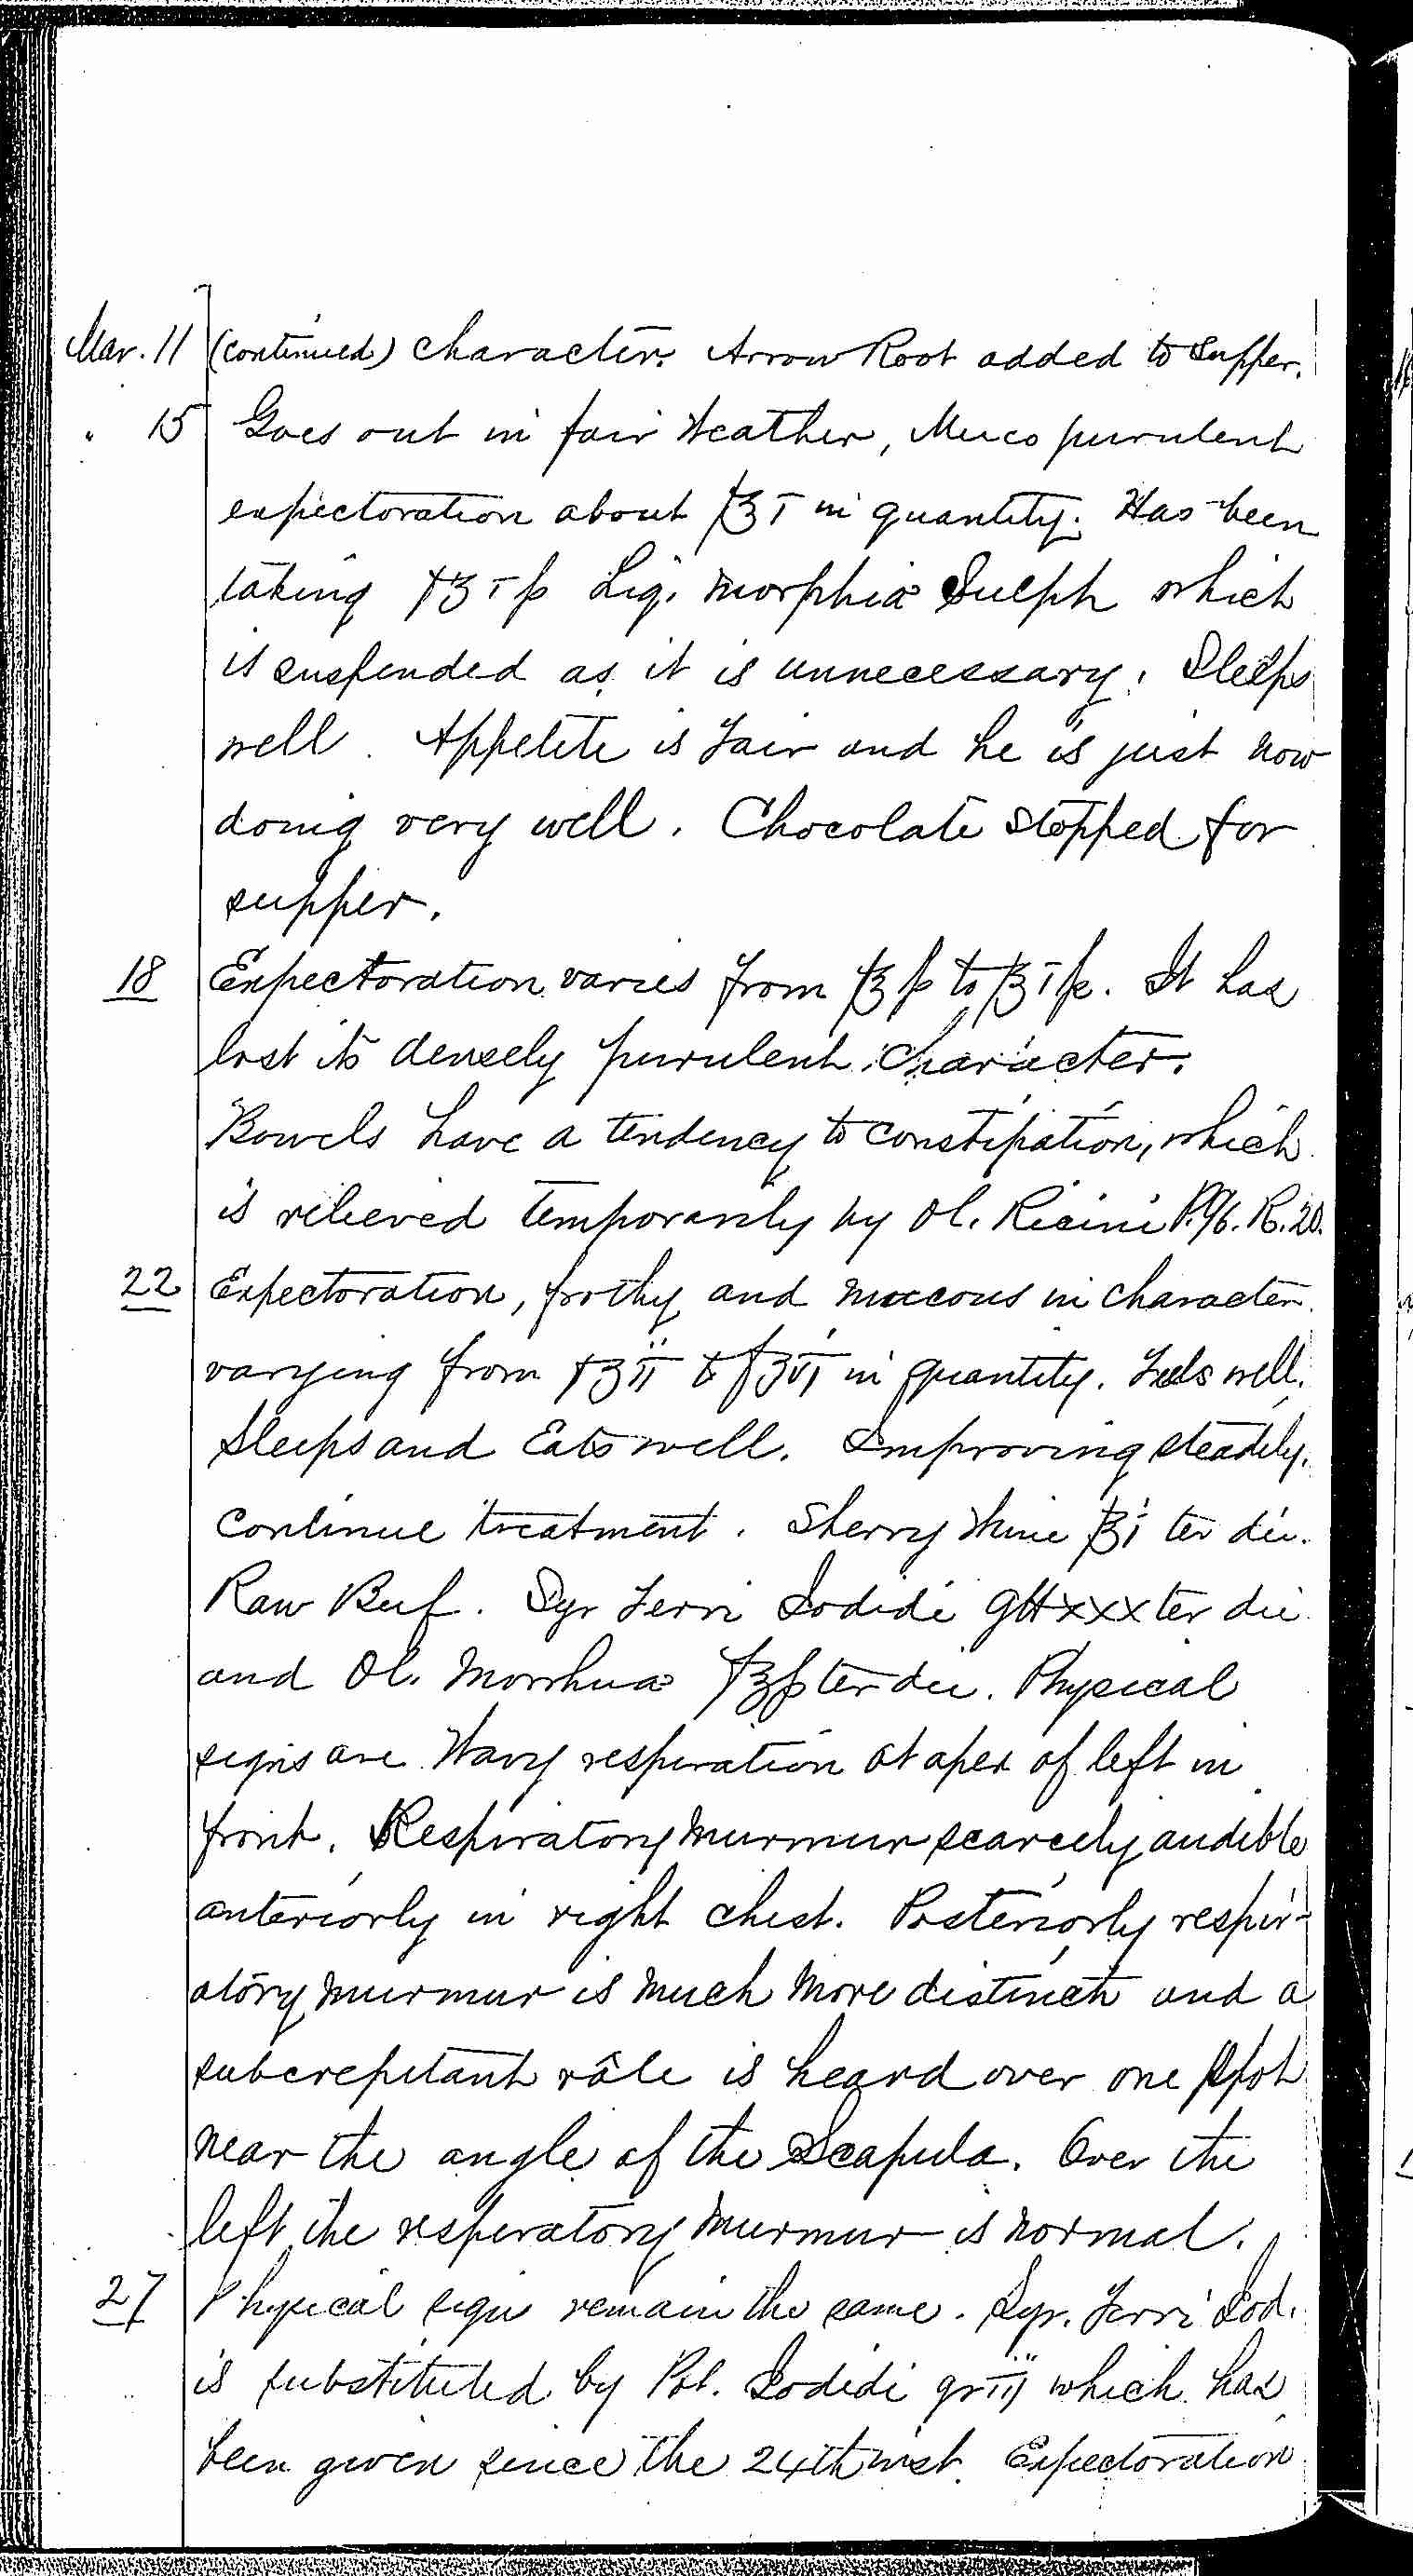 Entry for Peter C. Cheeks (page 10 of 16) in the log Hospital Tickets and Case Papers - Naval Hospital - Washington, D.C. - 1868-69